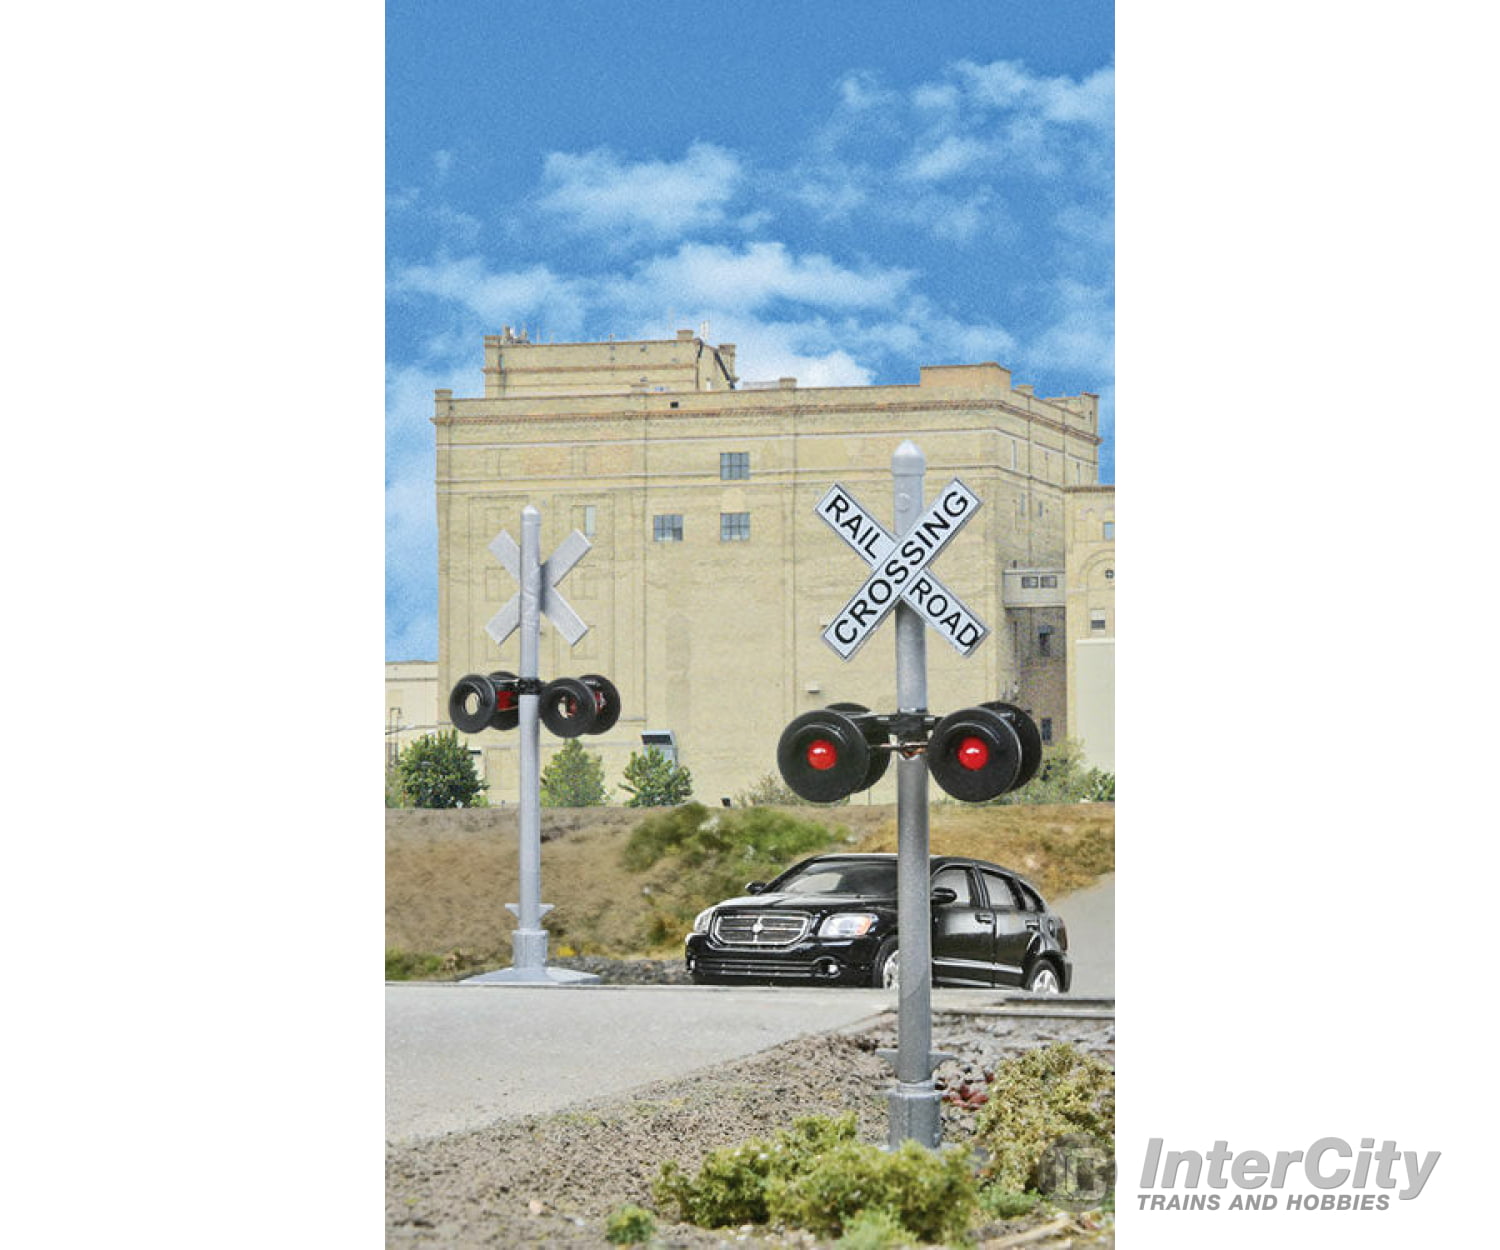 Walthers Scenemaster Ho 4333 Crossing Flashers -- Set Of 2 Working Signals (Use With Signal